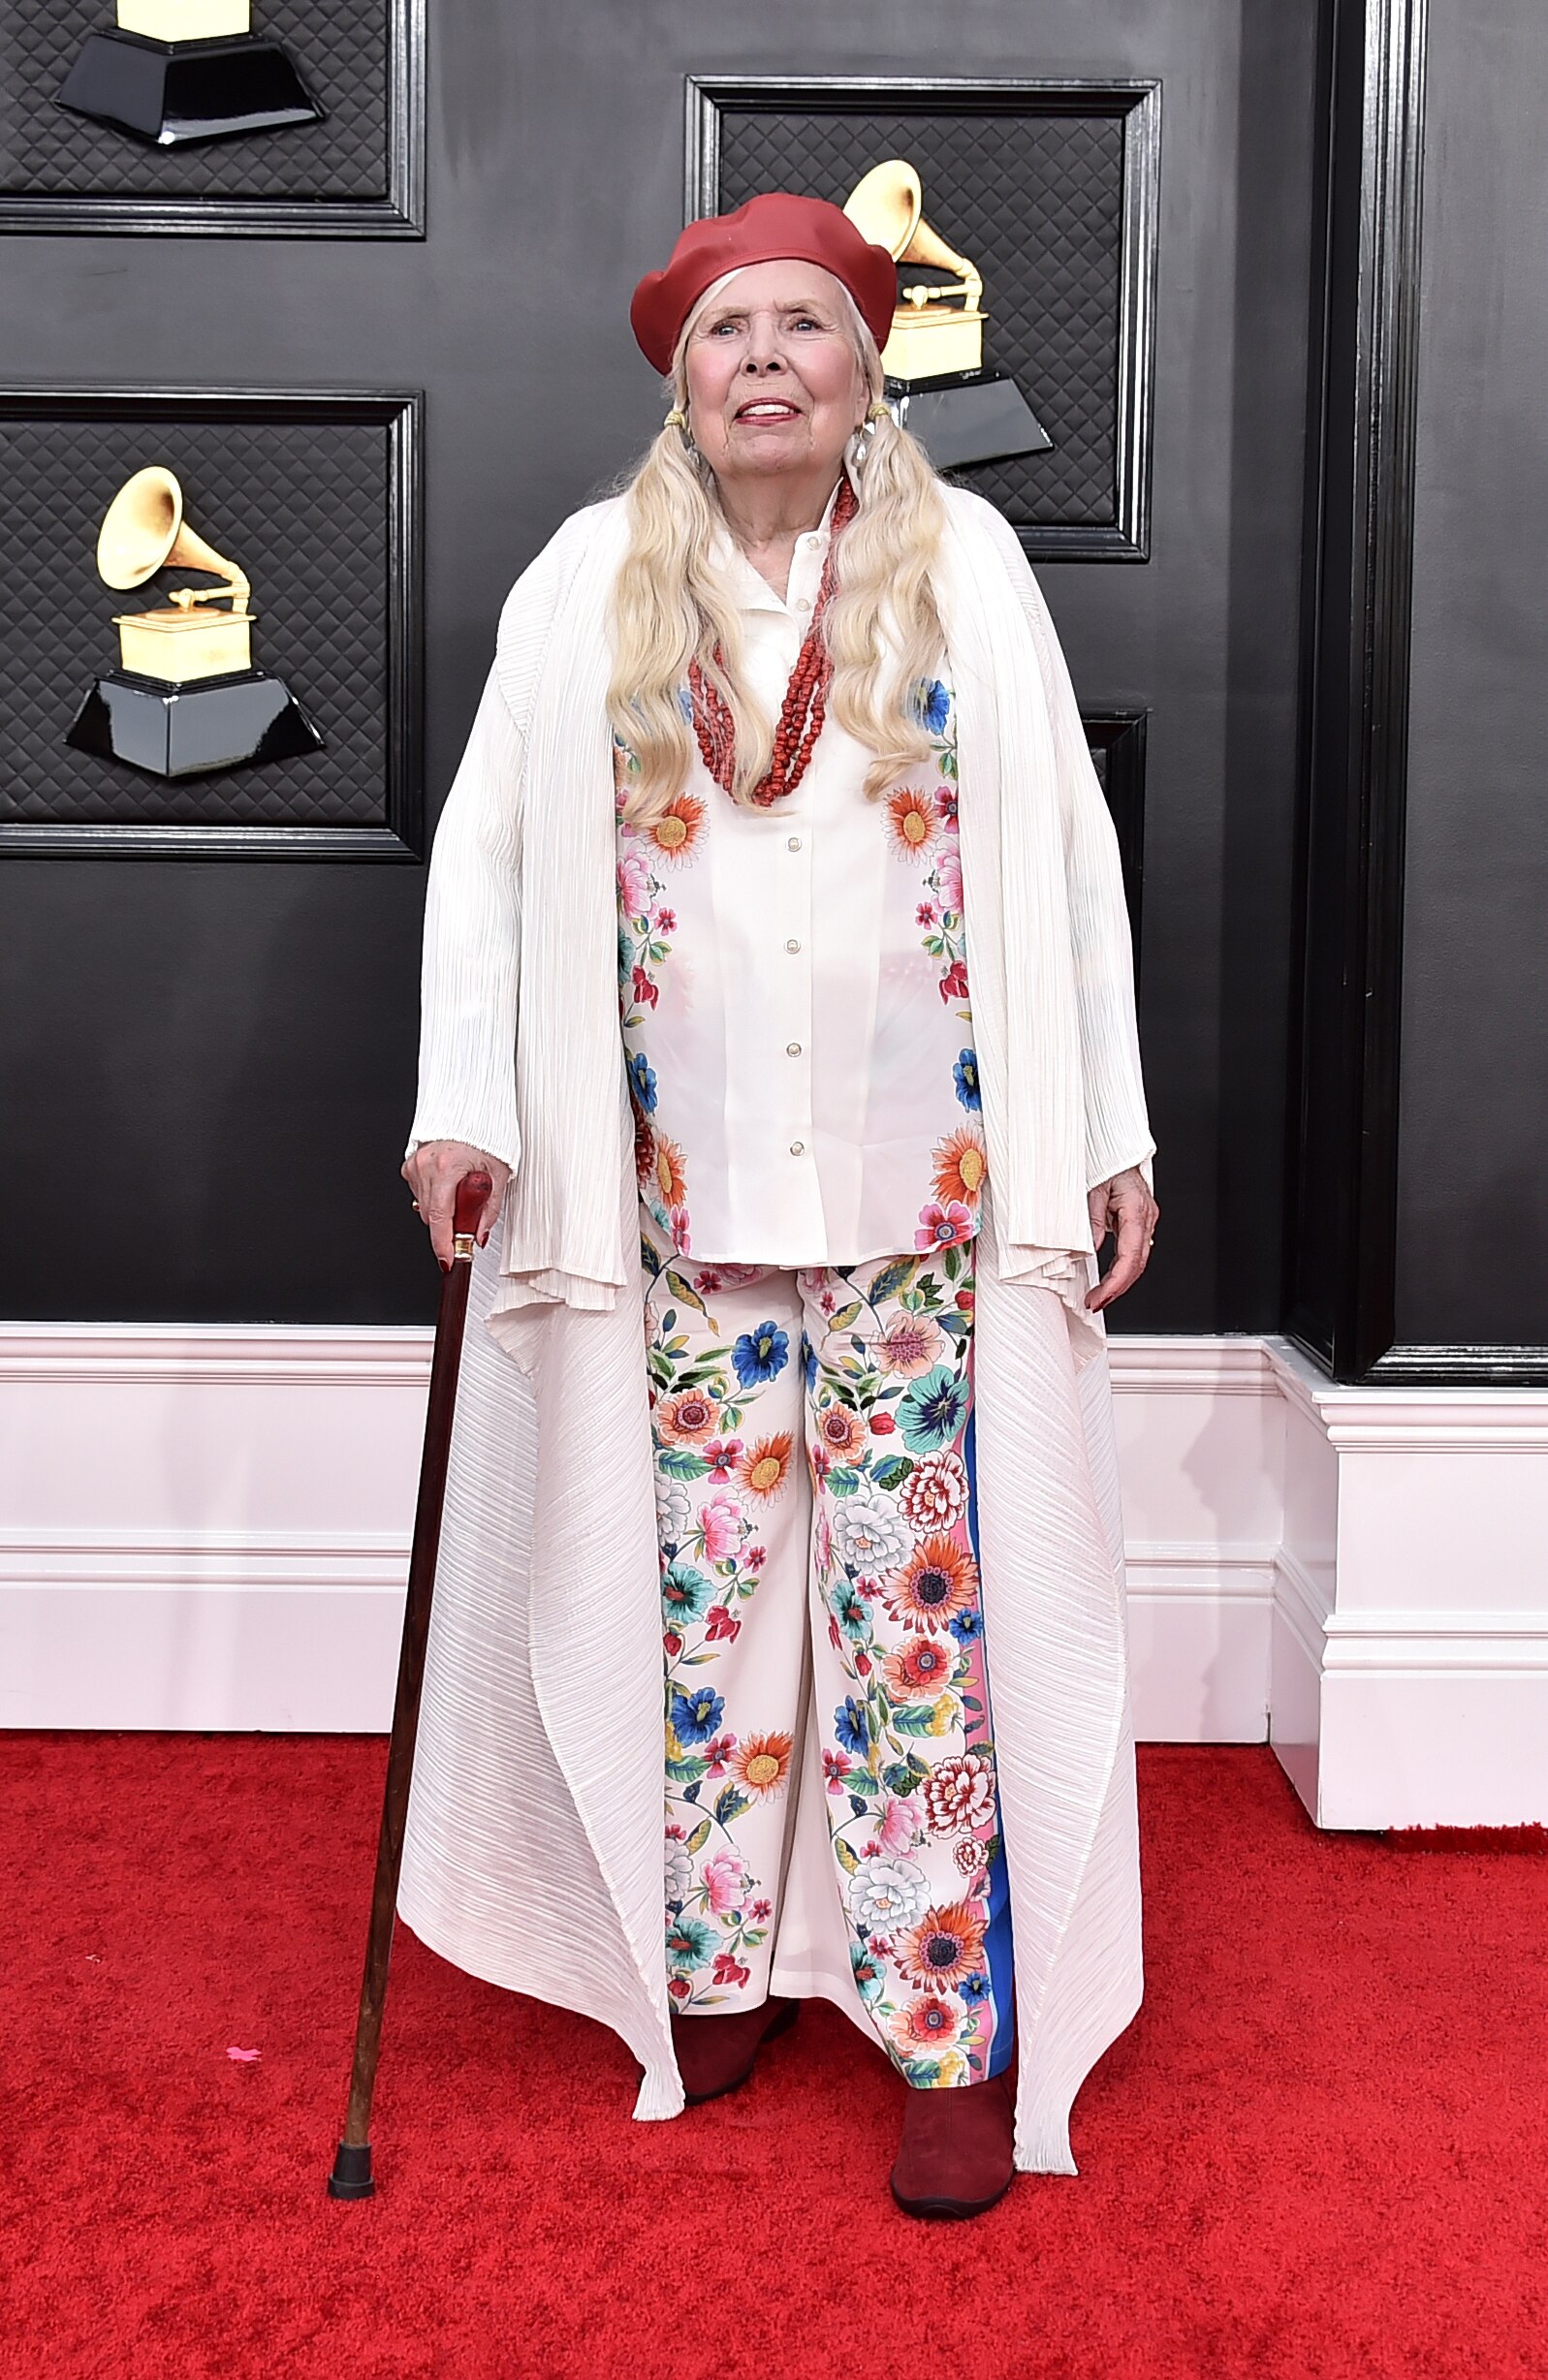 artist joni mitchell smiles on the grammys red carpet wearing a red beret and a white floral outfit holding a walking stick